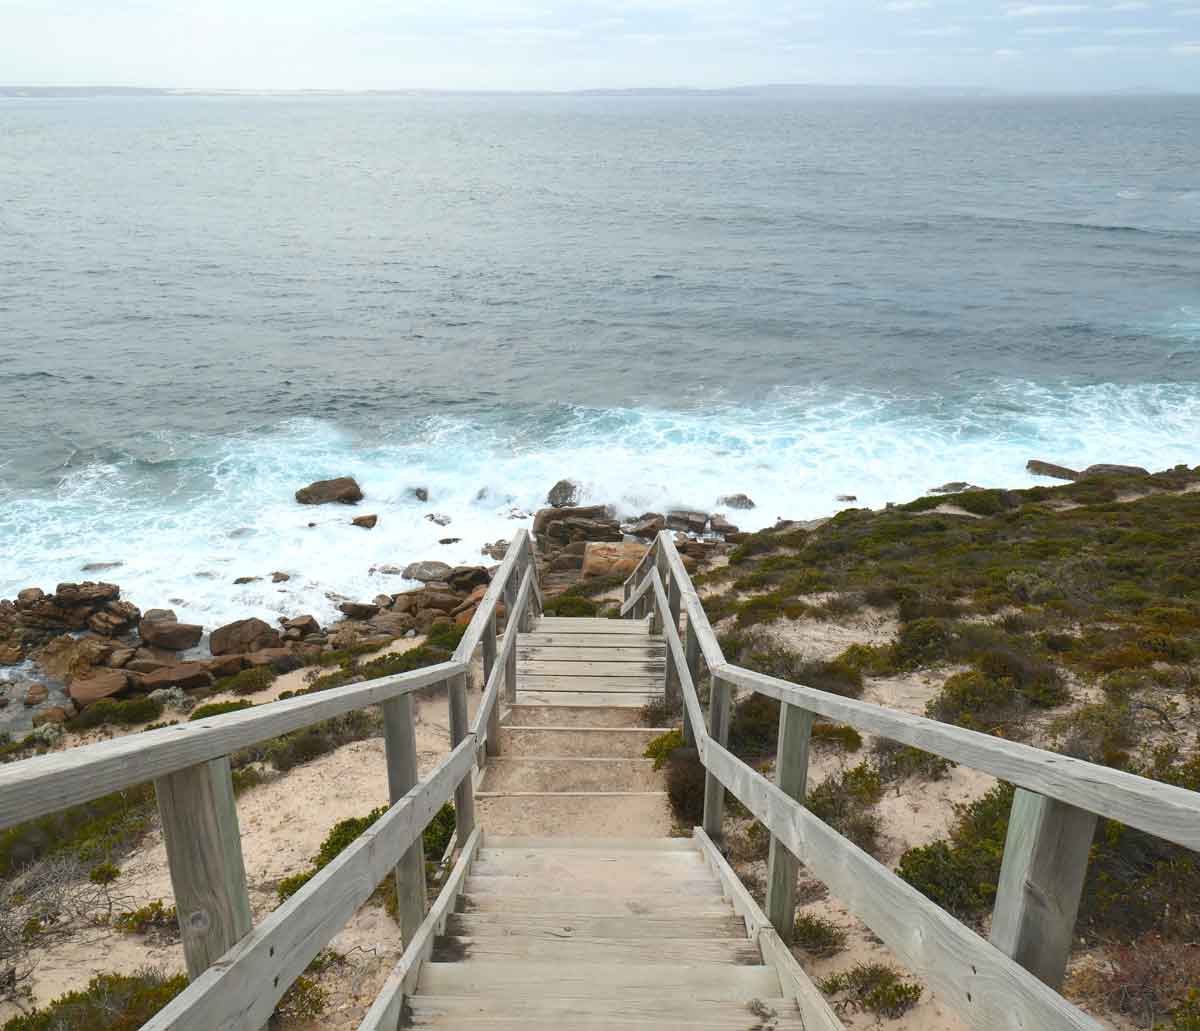 Stairs to the shoreline at Pelamis Point. Located in Whaler's Way Sanctuary, Eyre Peninsula, South Australia.